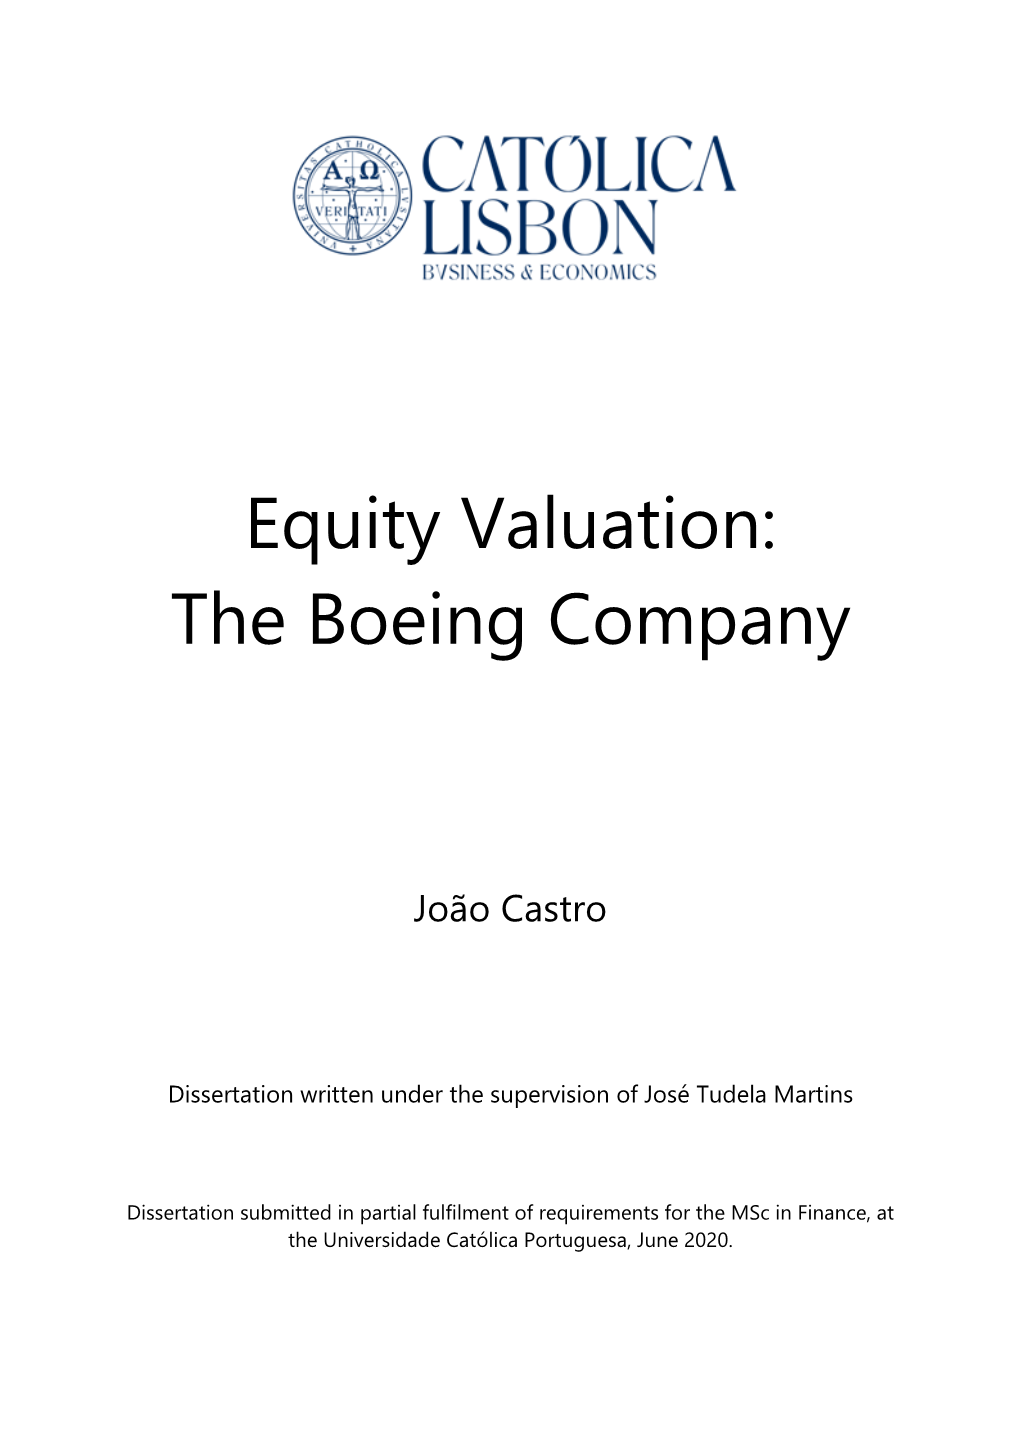 Equity Valuation: the Boeing Company